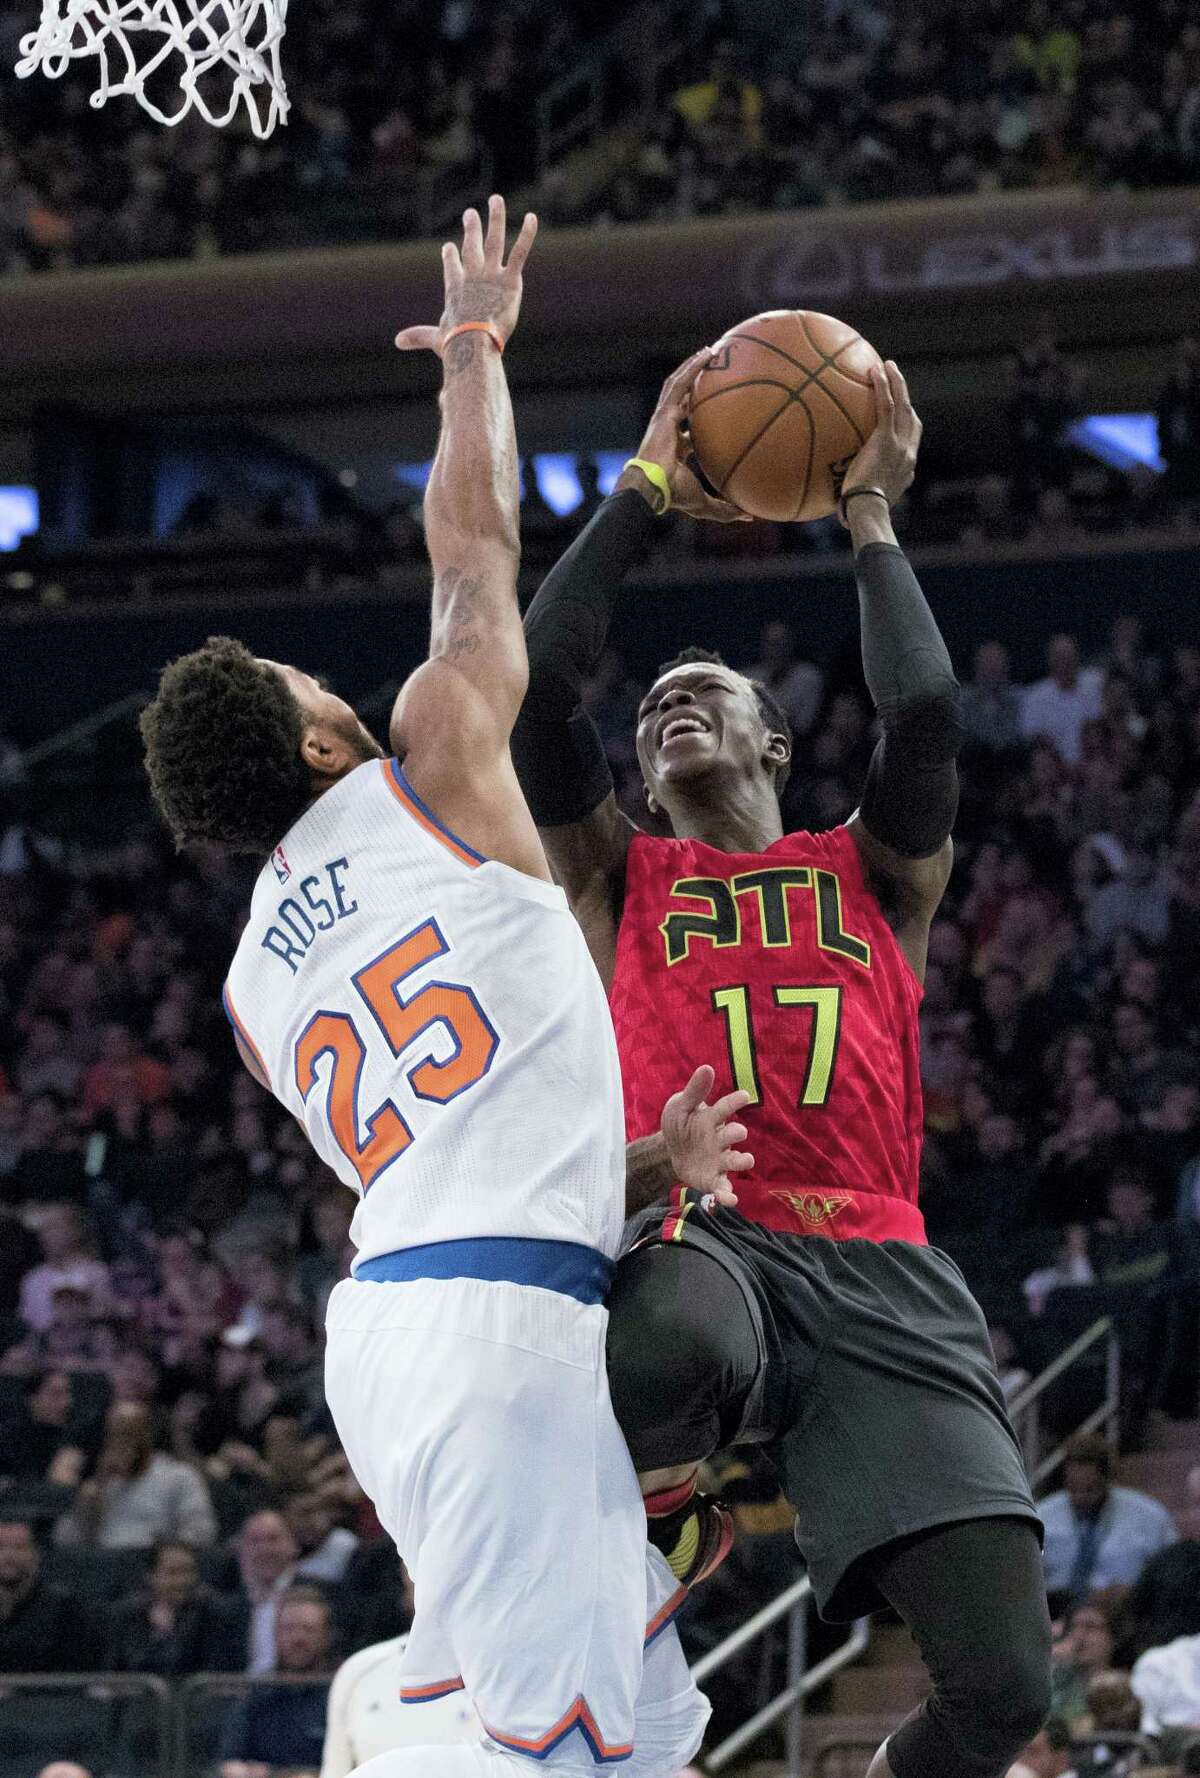 Atlanta Hawks guard Dennis Schroder (17) goes to the basket against New York Knicks guard Derrick Rose (25) during the second half of an NBA basketball game, Sunday, Nov. 20, 2016, at Madison Square Garden in New York. The Knicks won 104-94. (AP Photo/Mary Altaffer)